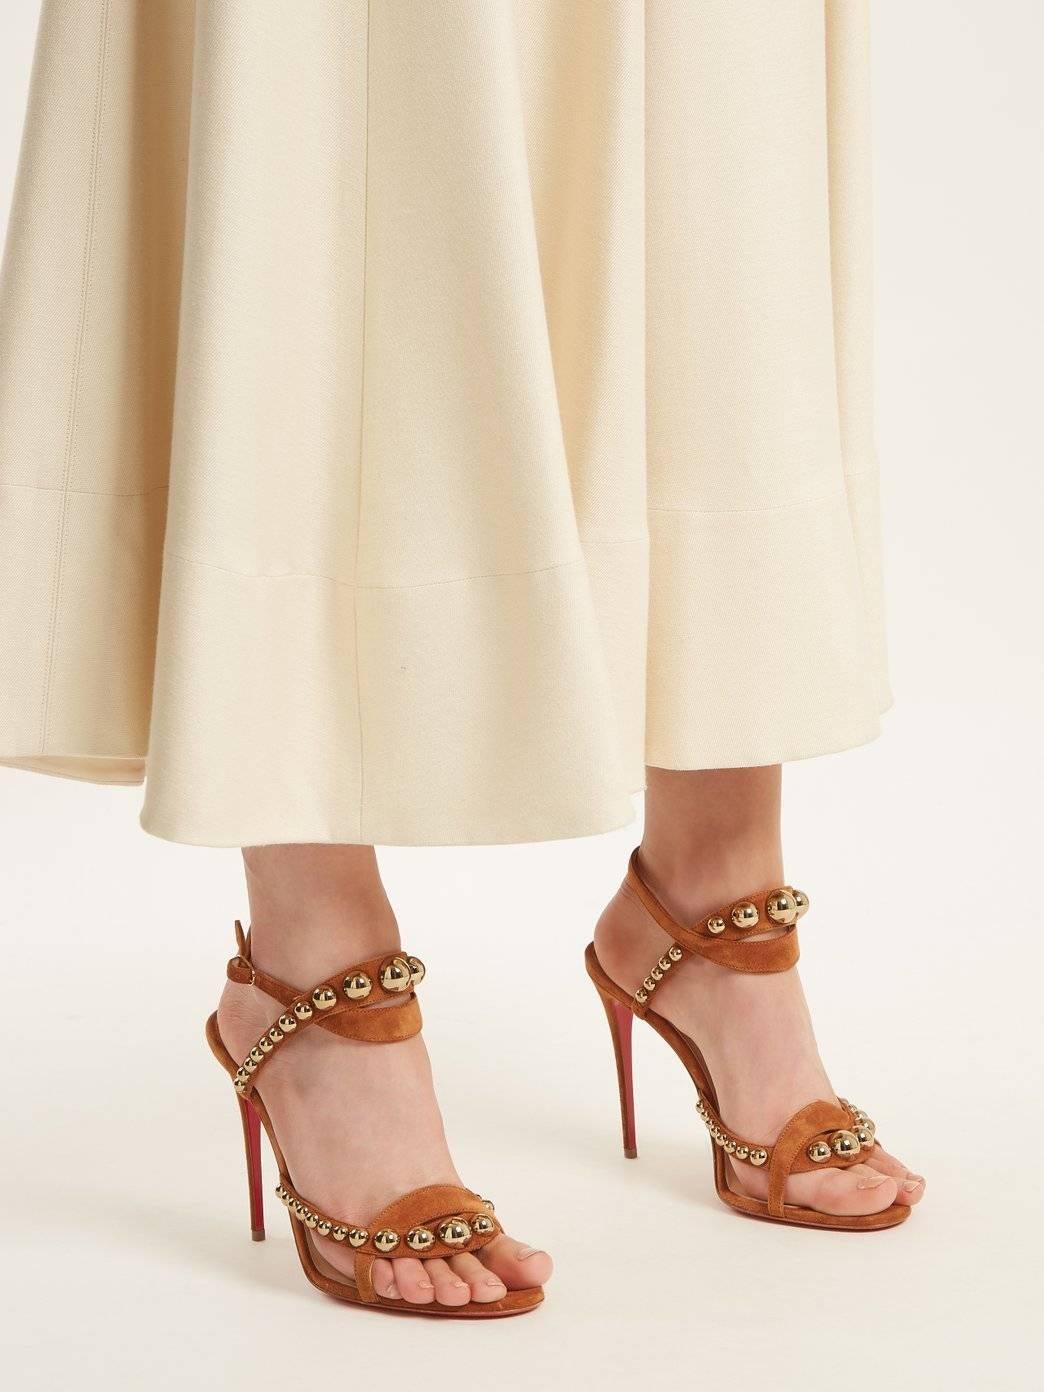 Christian Louboutin New Cognac Suede Gold Stud Evening Sandals Heels in Box

Size IT 36
Suede
Metal
Gold tone hardware
Buckle closure
Made in Italy
Heel height 4.25